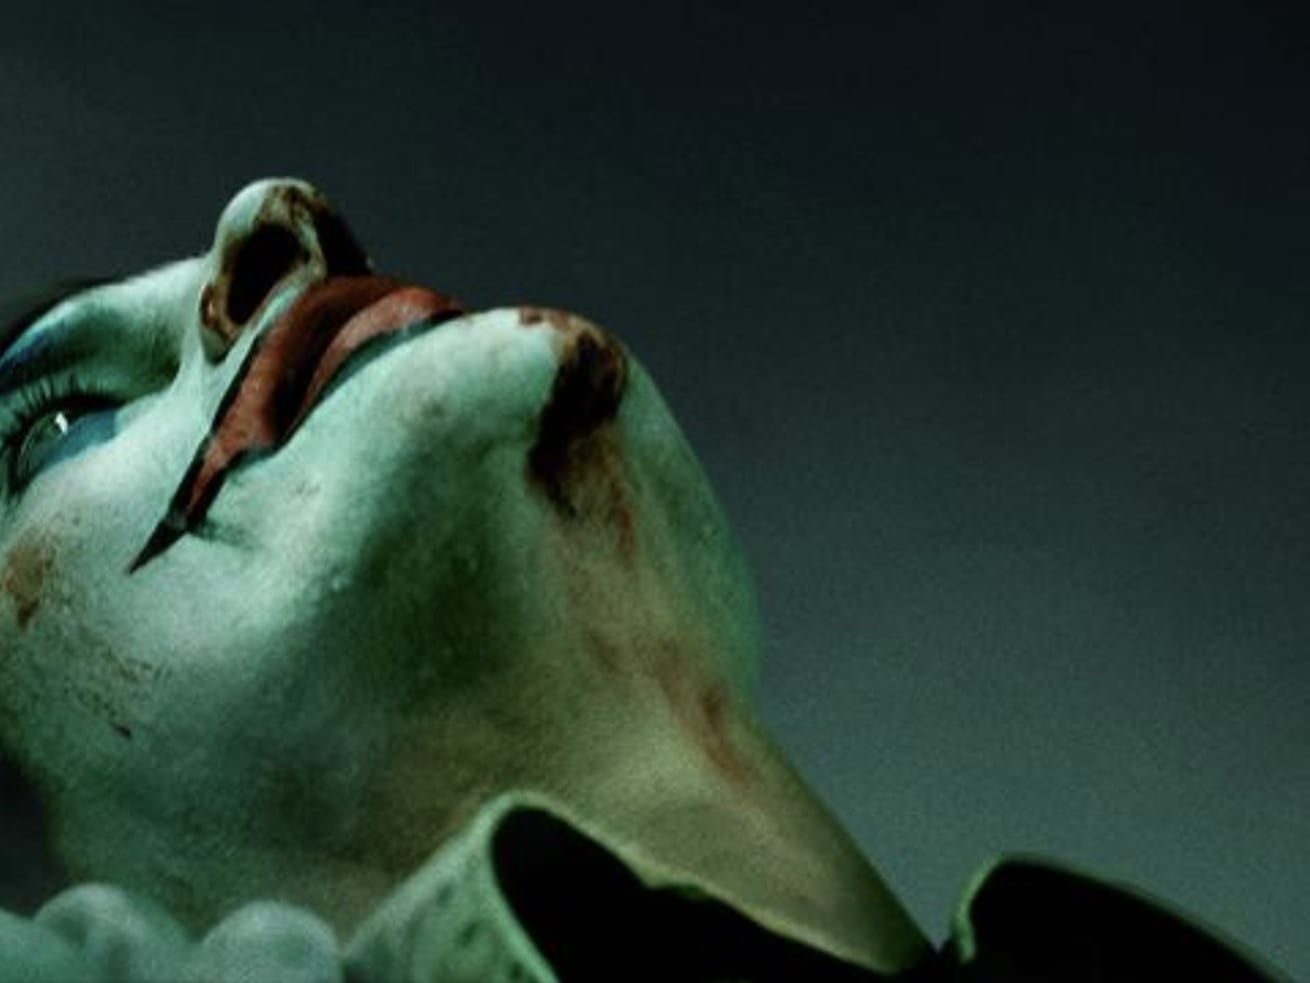 Why Joker is unlikely to inspire real-world violence, explained by an expert